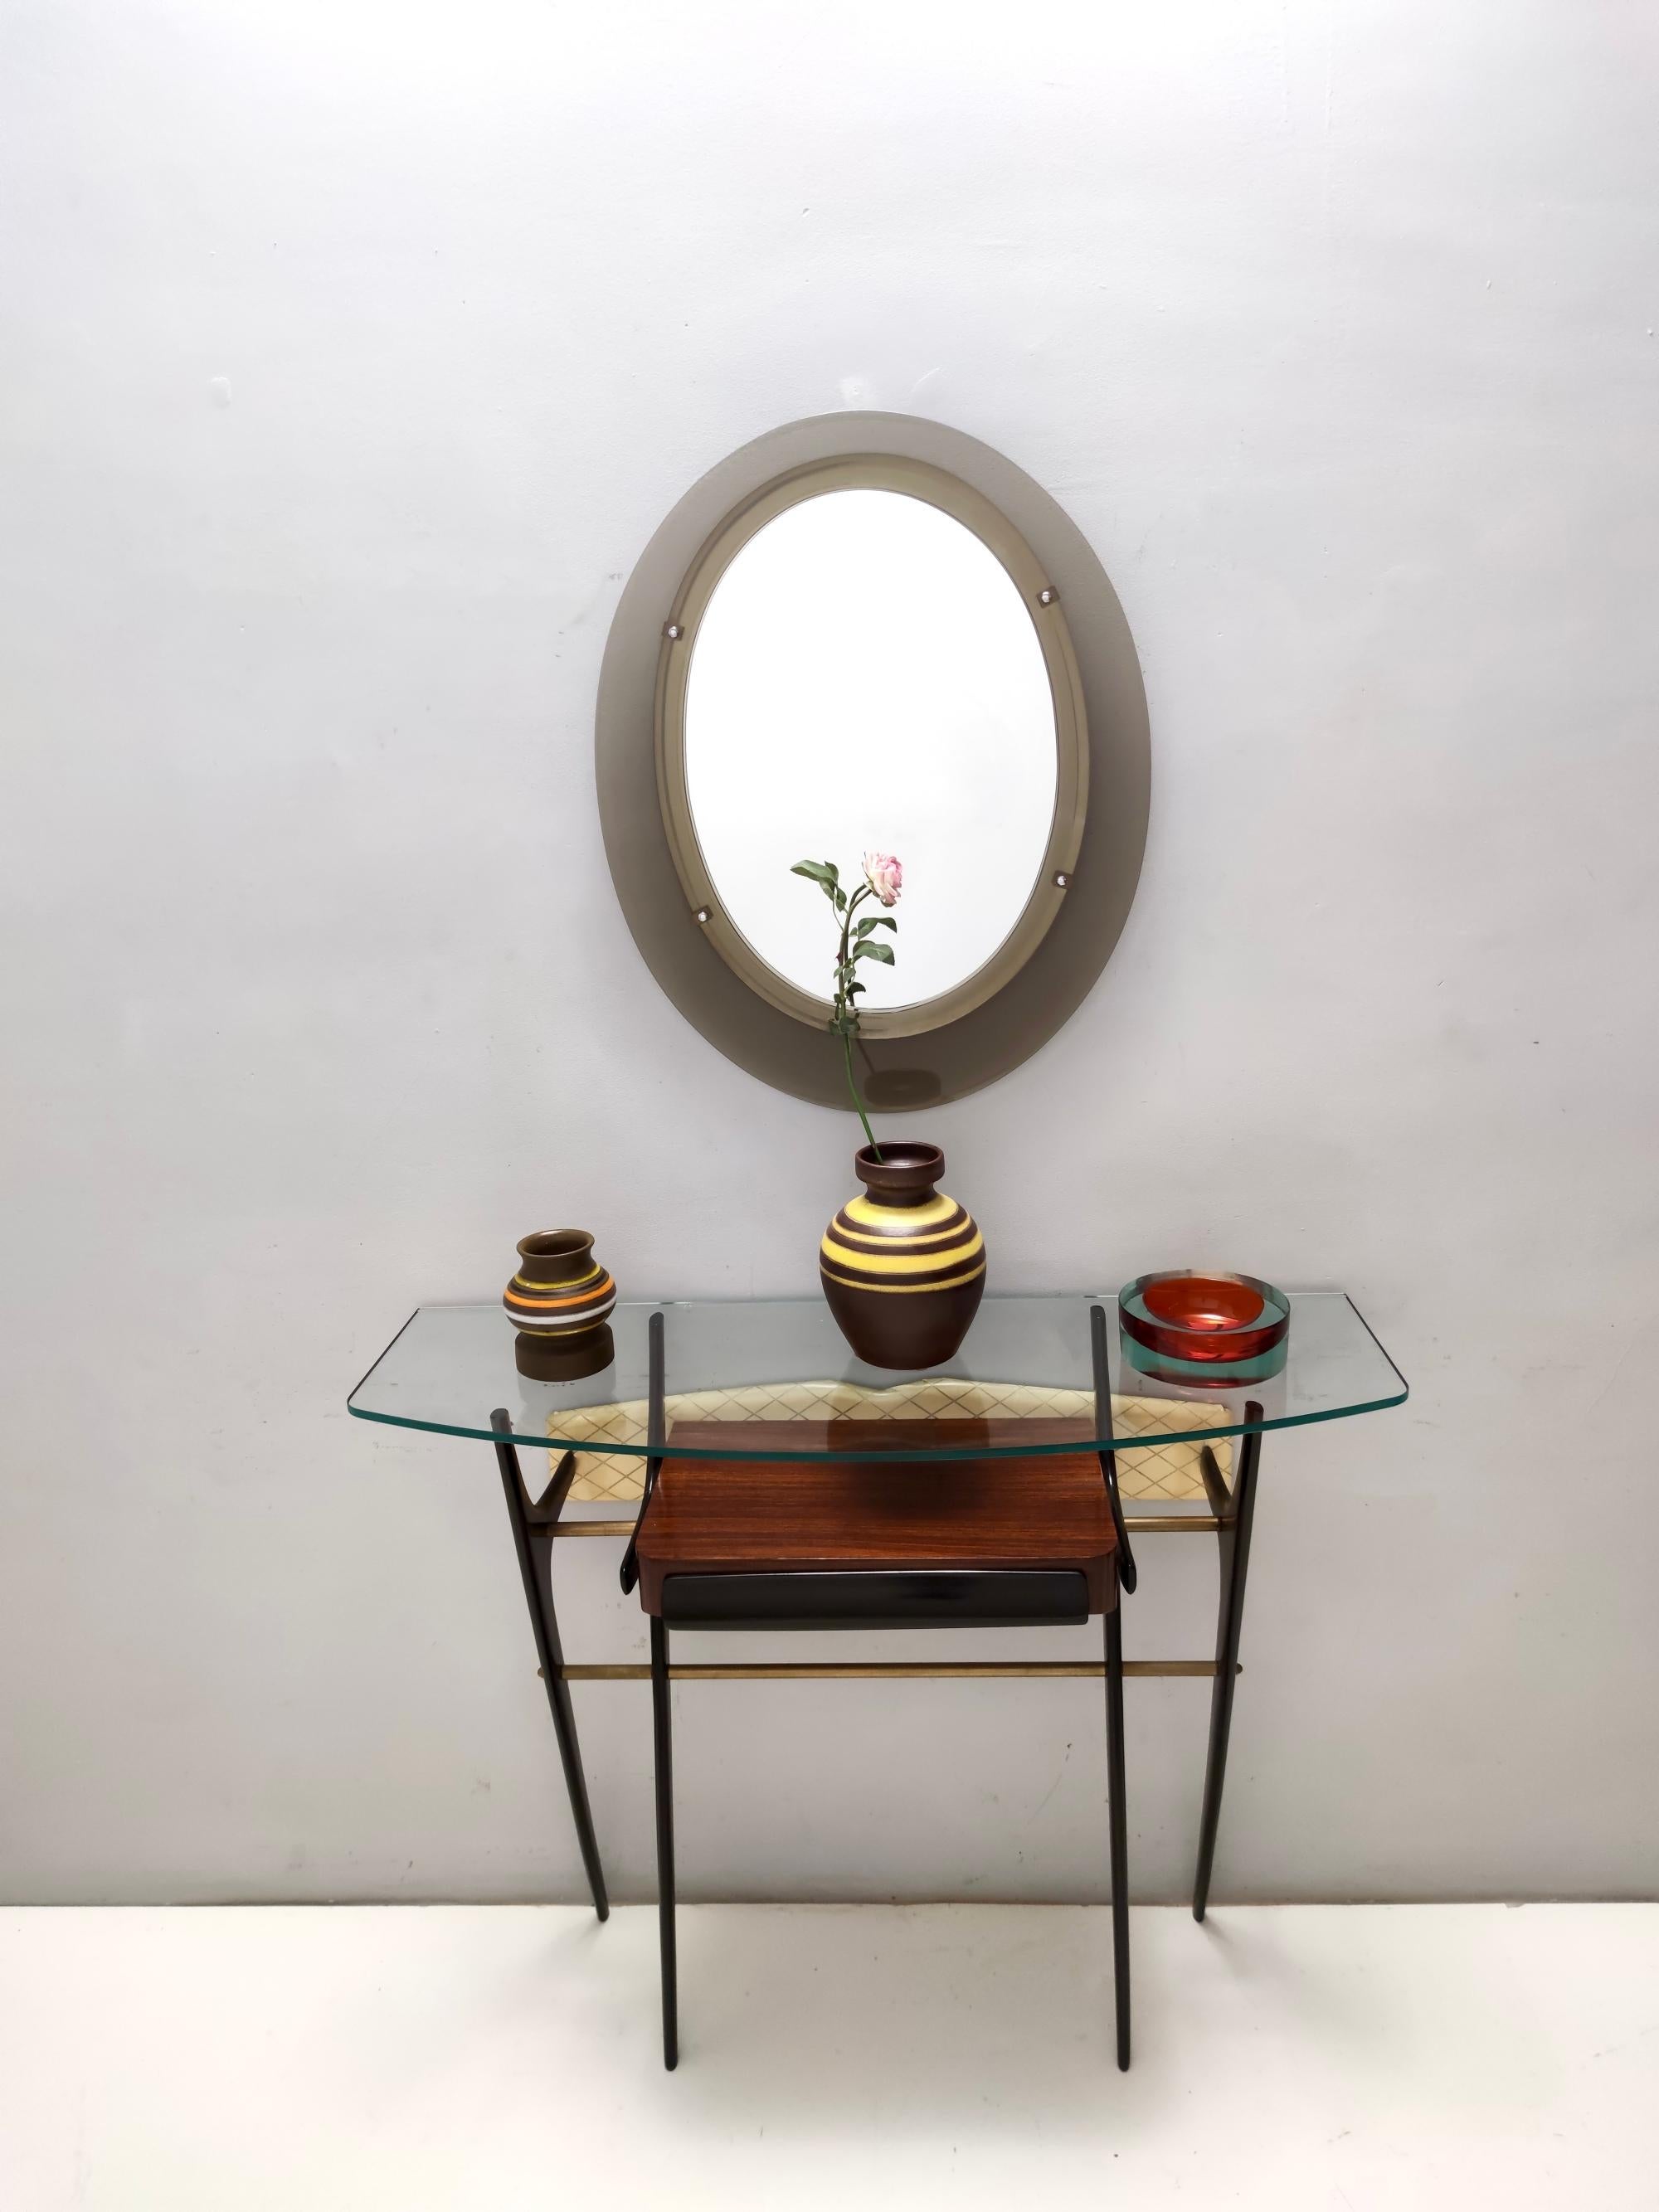 Made in Italy, 1950s. 
It features a polished and ebonized beech frame with brass details and a glass top.  
The console table might show slight traces of use since it's vintage, but it can be considered as in excellent condition with its original